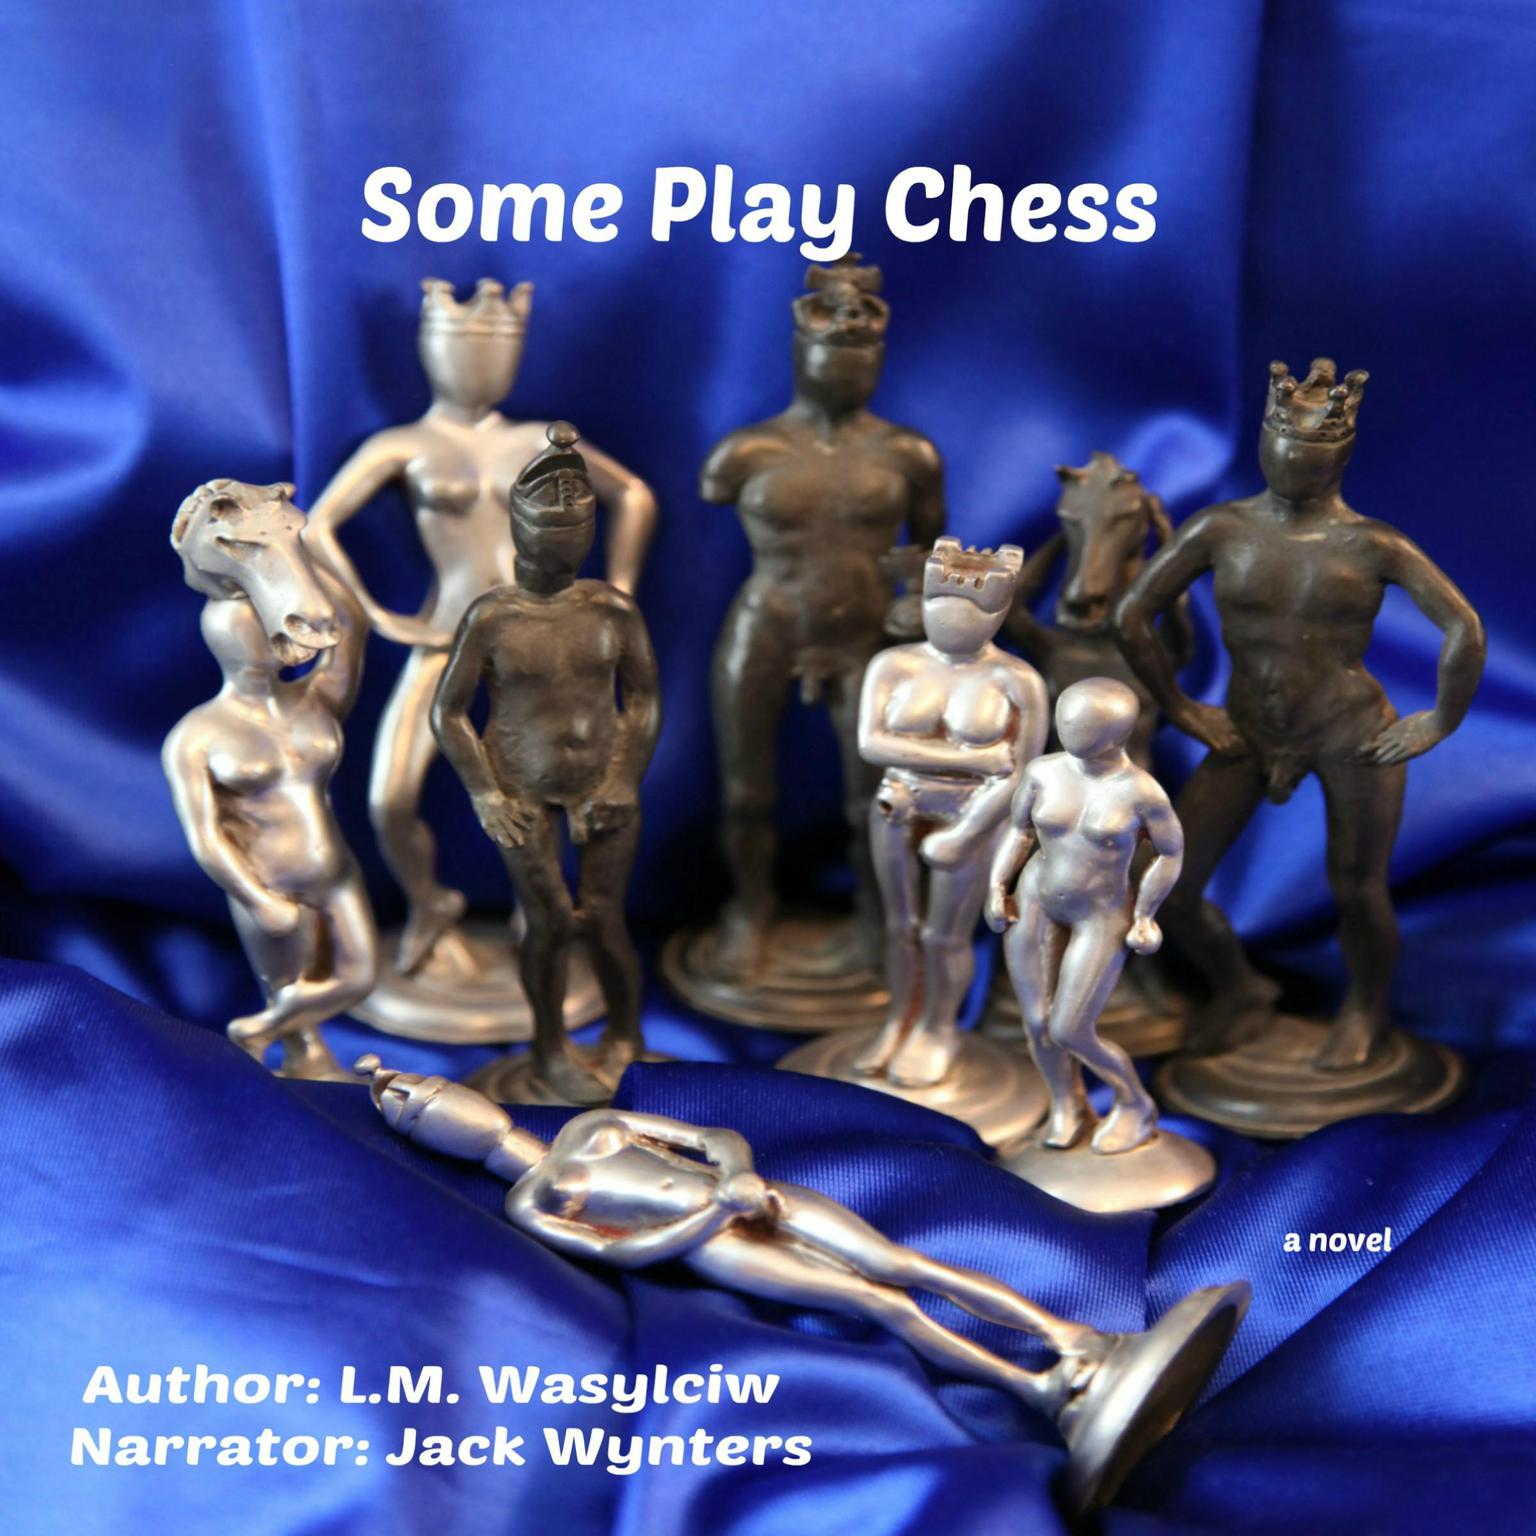 Some Play Chess (Abridged) Audiobook, by L. M. Wasylciw